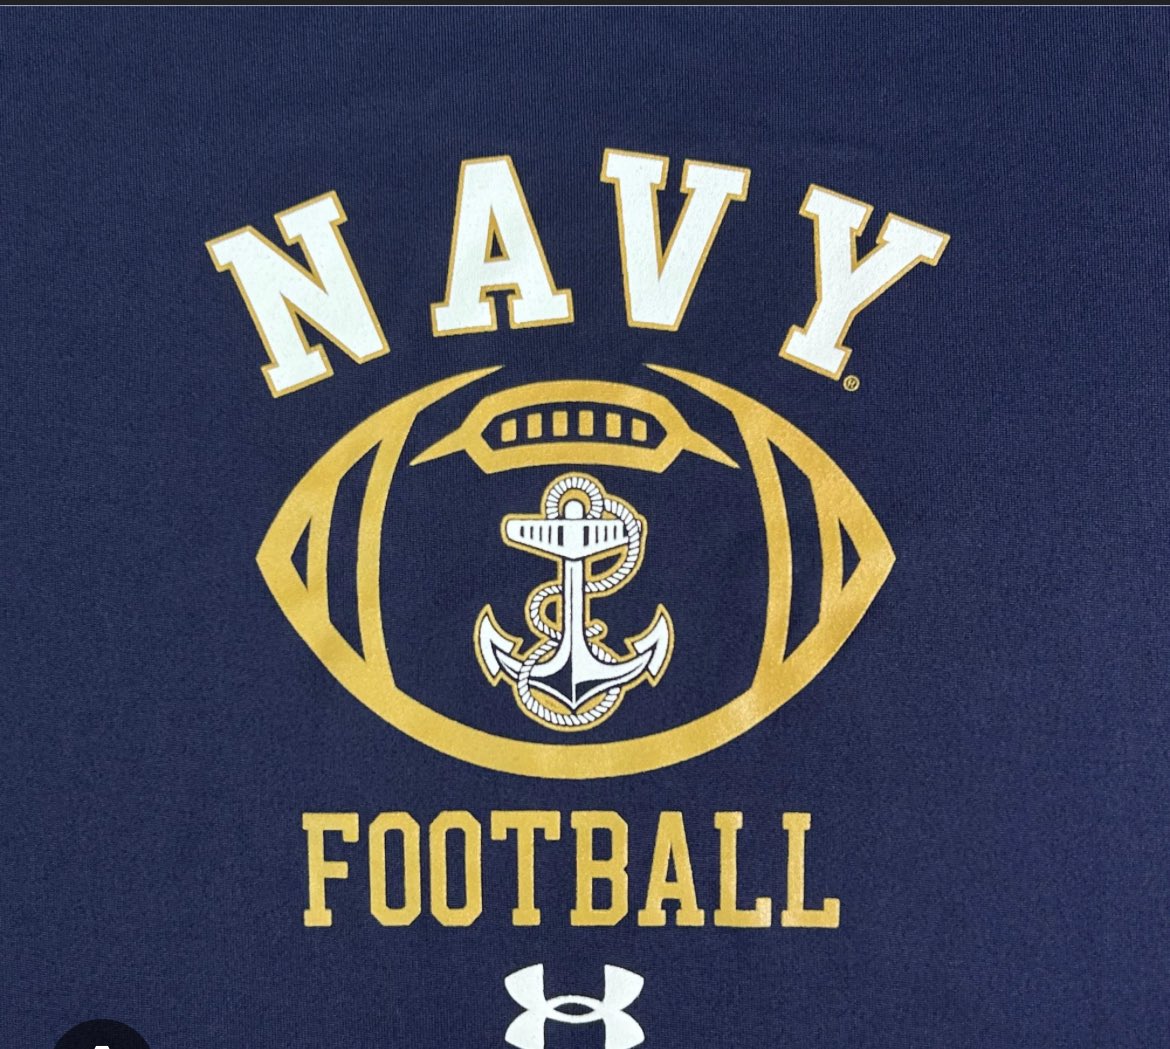 All glory to God! After a great conversation with @CoachEricLewis I am excited to announce that I have gotten my 3rd D1 offer to the Naval Academy! Thank you for Coaches, family and friends for helping me get this opportunity. #GoNavy @BrandonHuffman @247Sports @marinij_sports